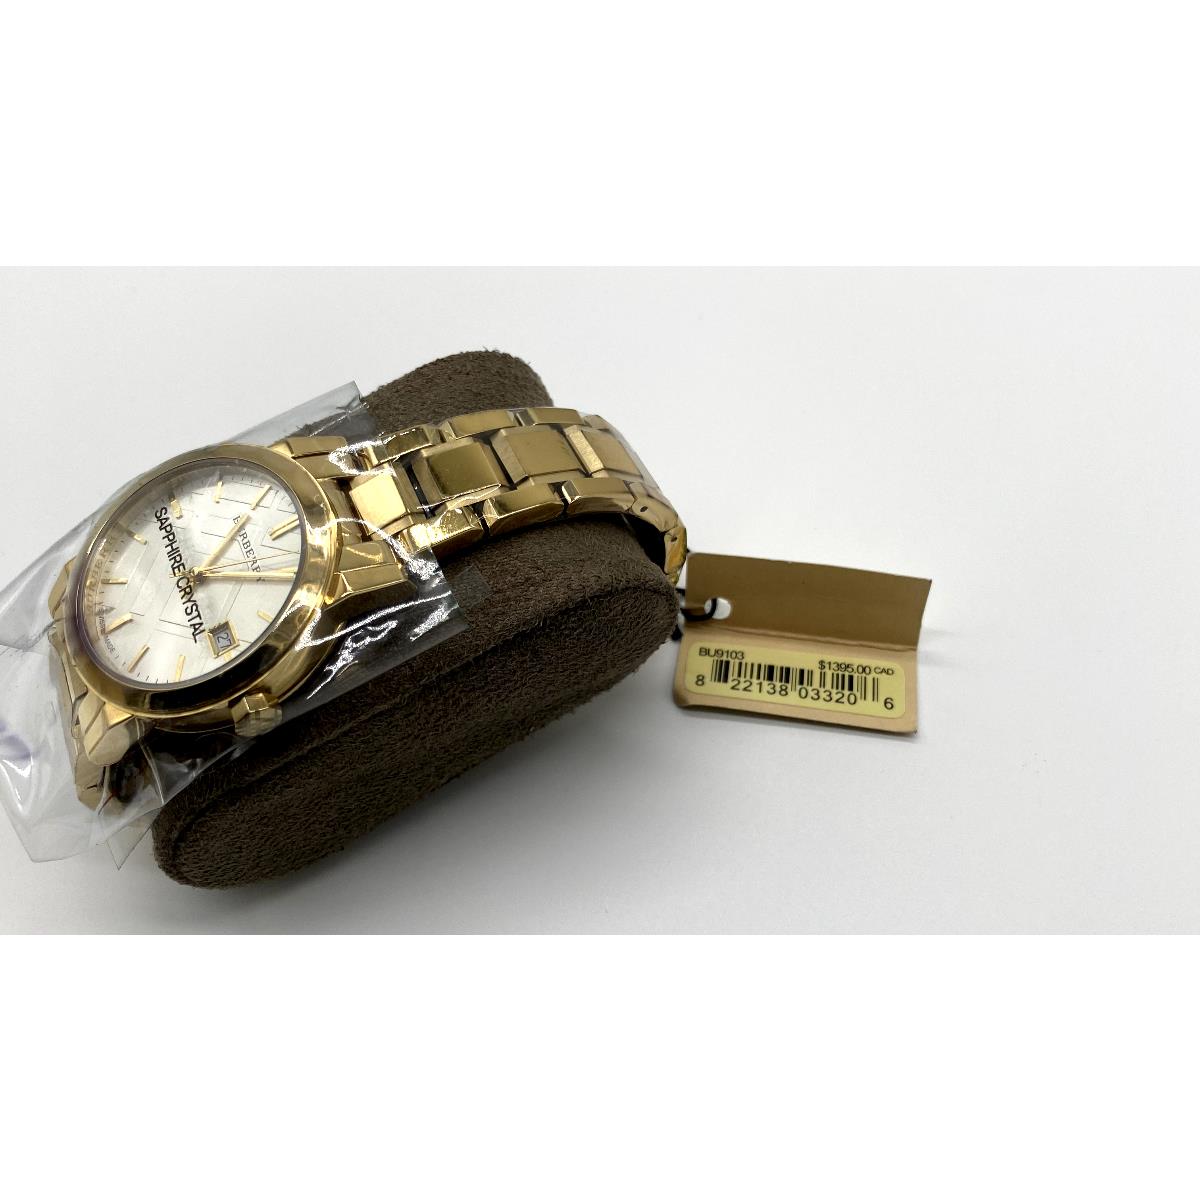 Burberry watch Ladies - Gold Dial, Gold Band 2